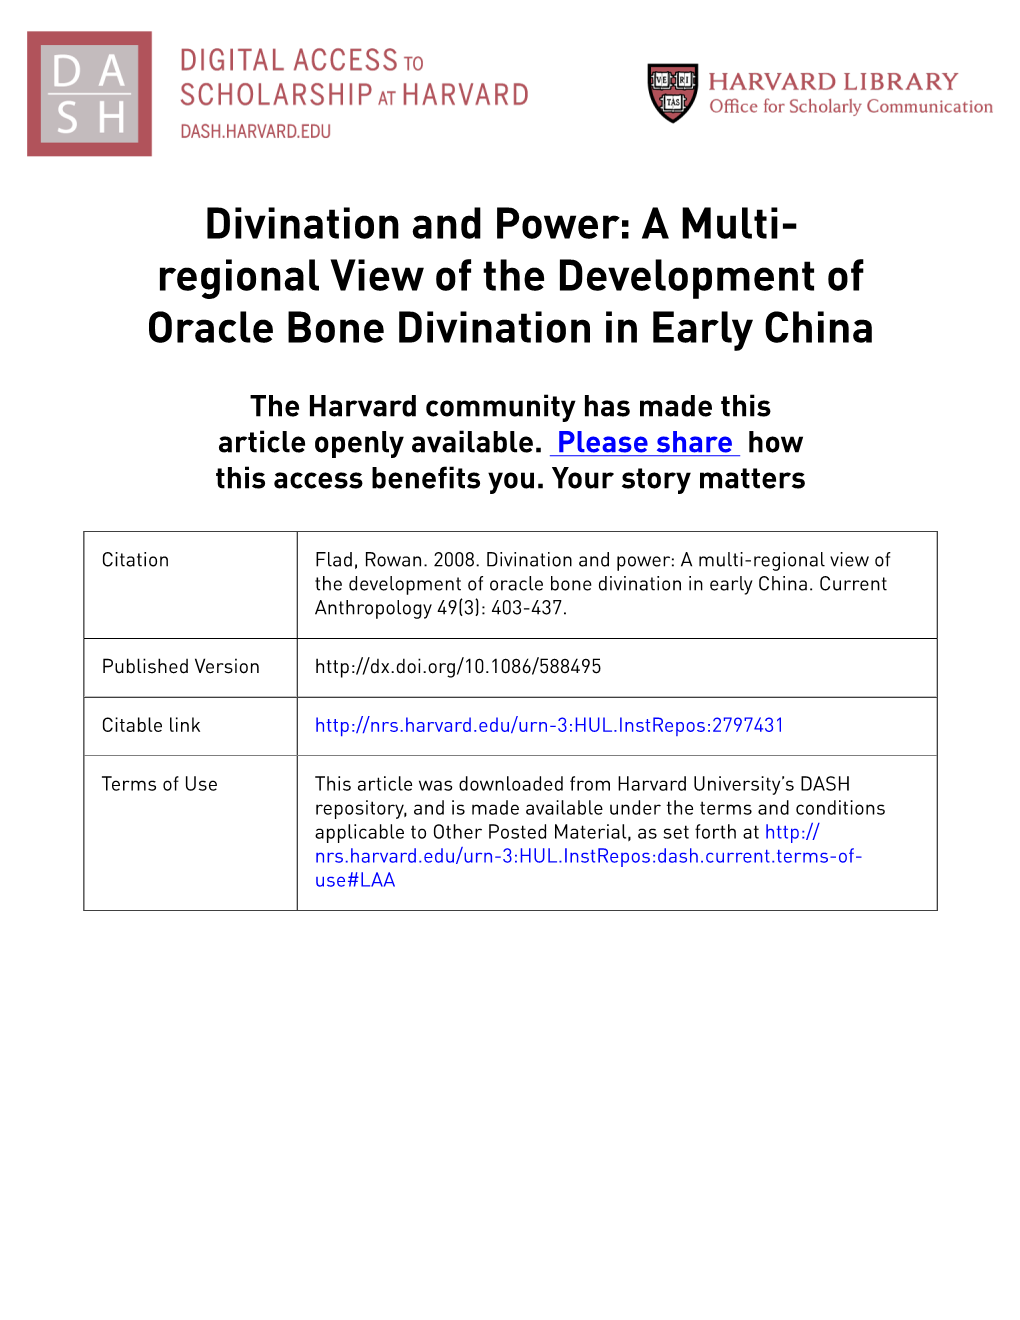 Divination and Power: a Multi- Regional View of the Development of Oracle Bone Divination in Early China